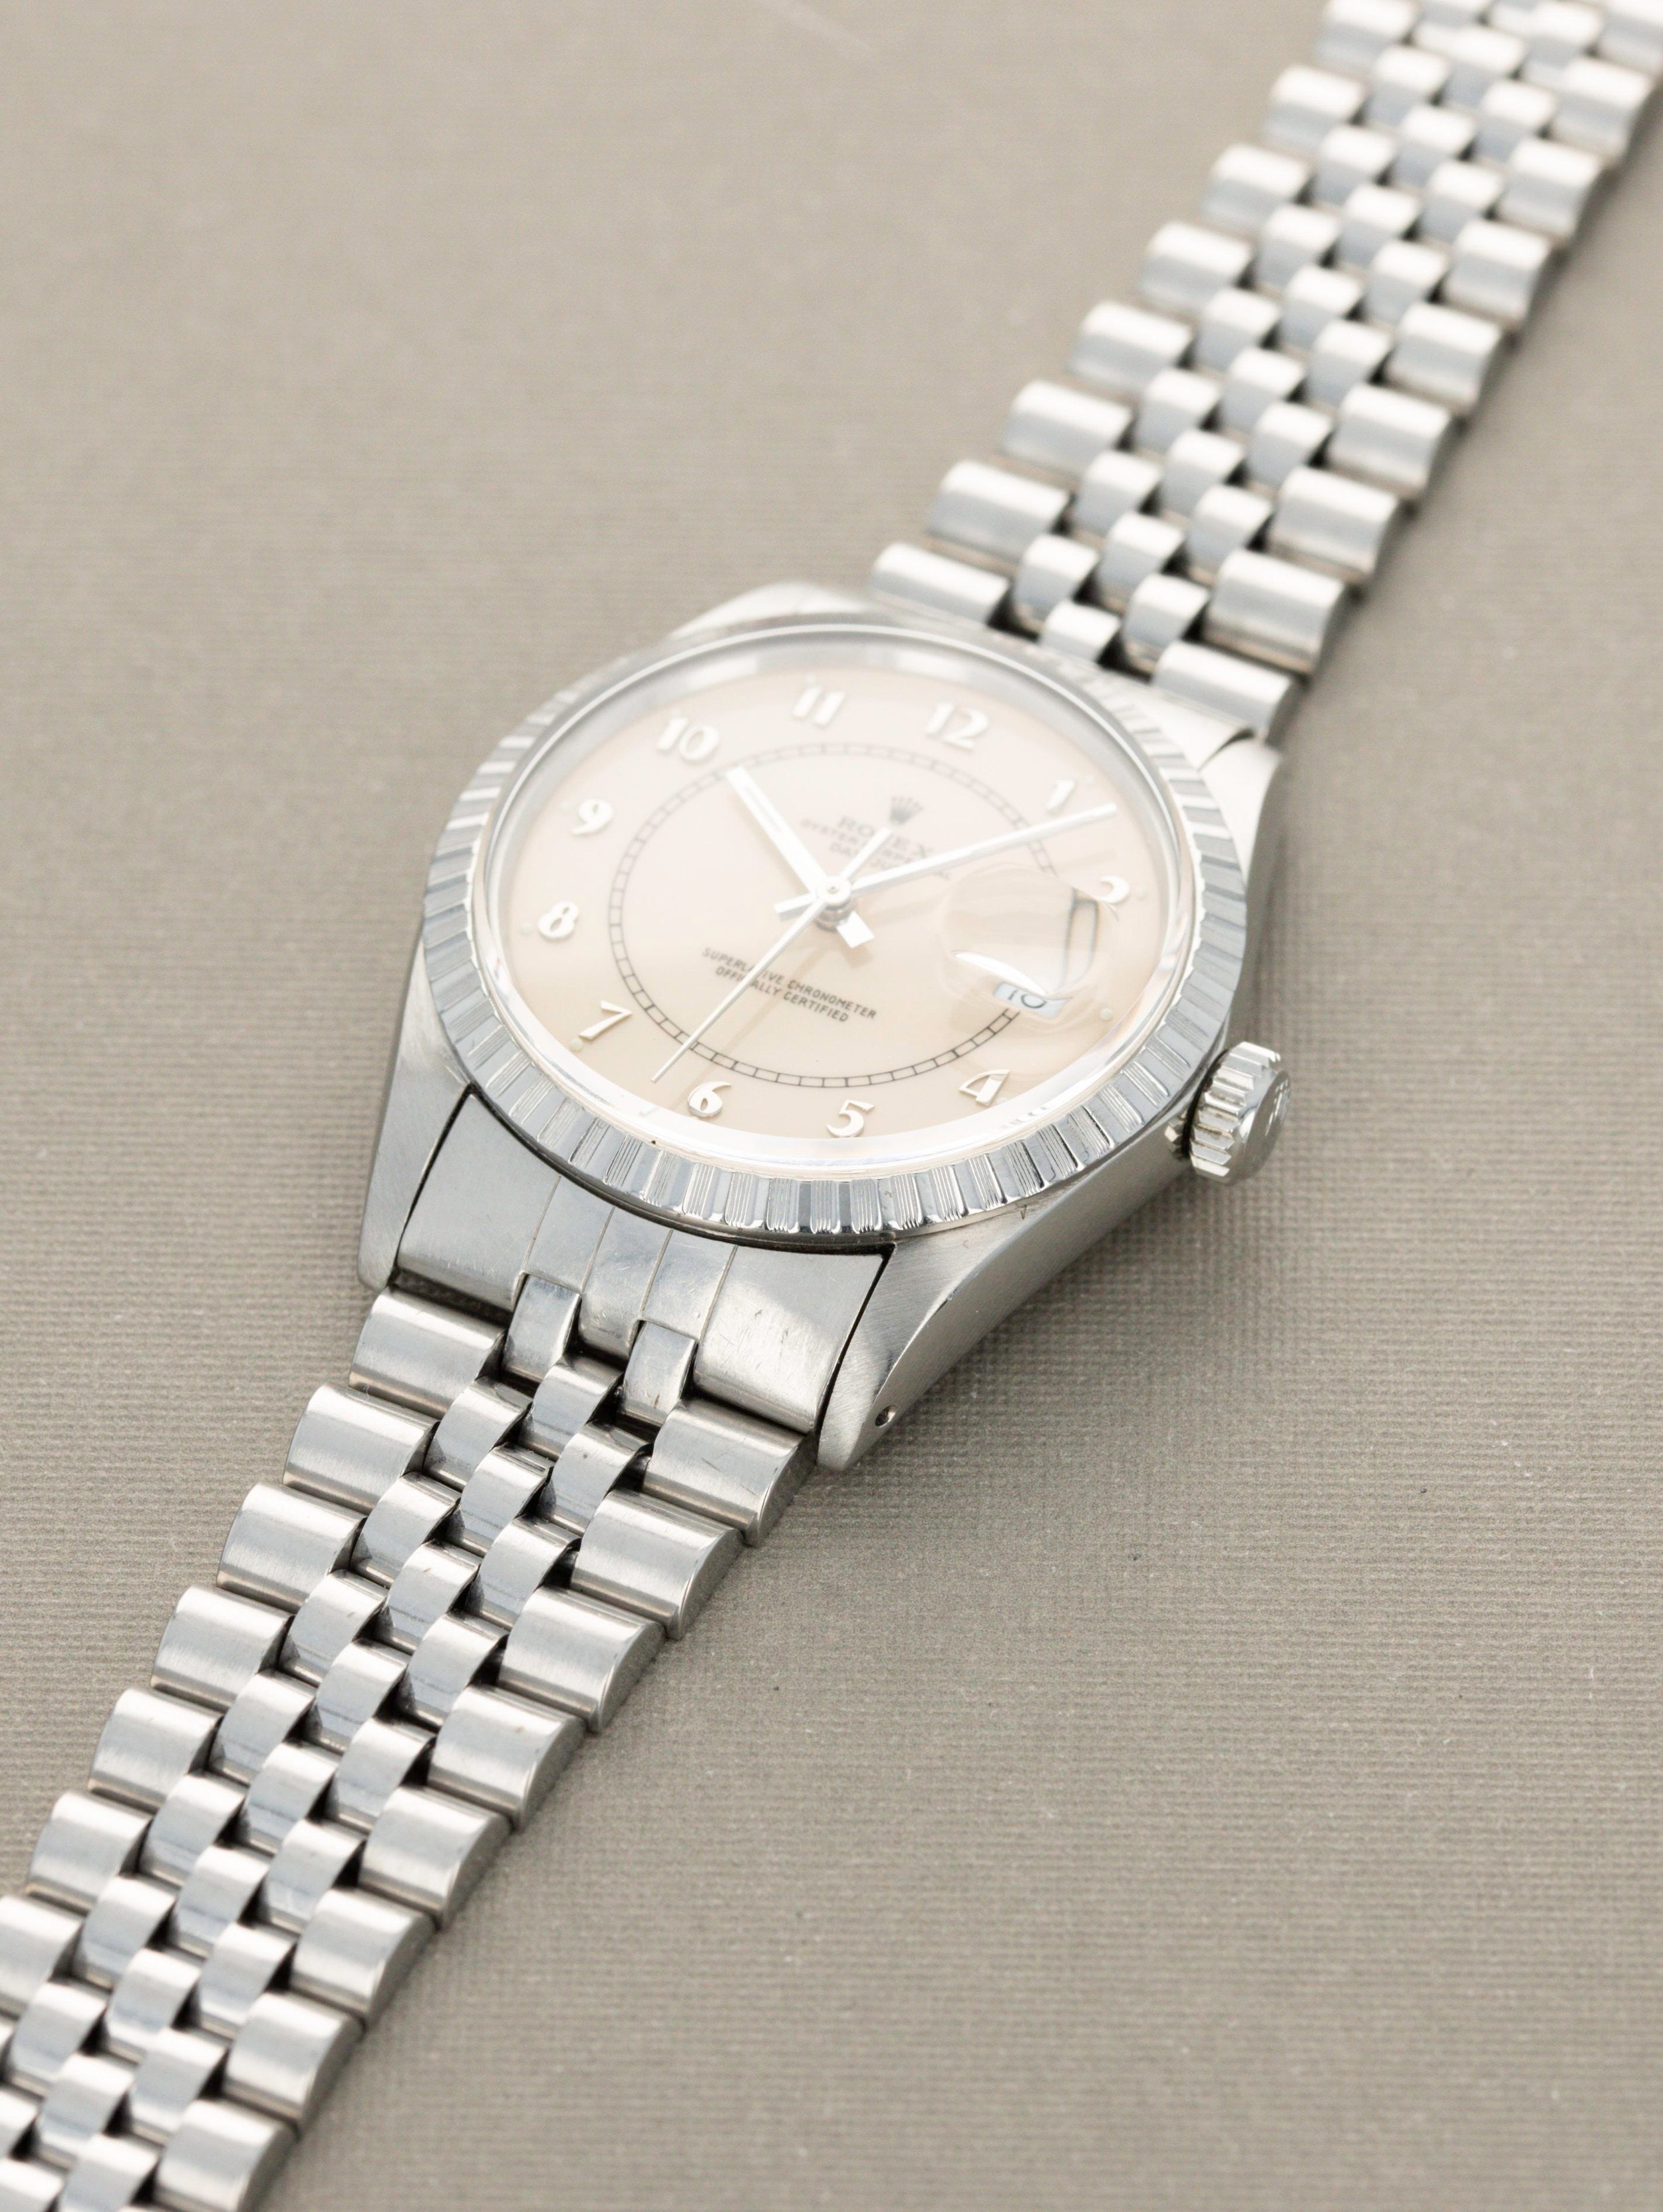 Rolex Datejust Ref. 16030 - Boiler Gauge Dial with Papers